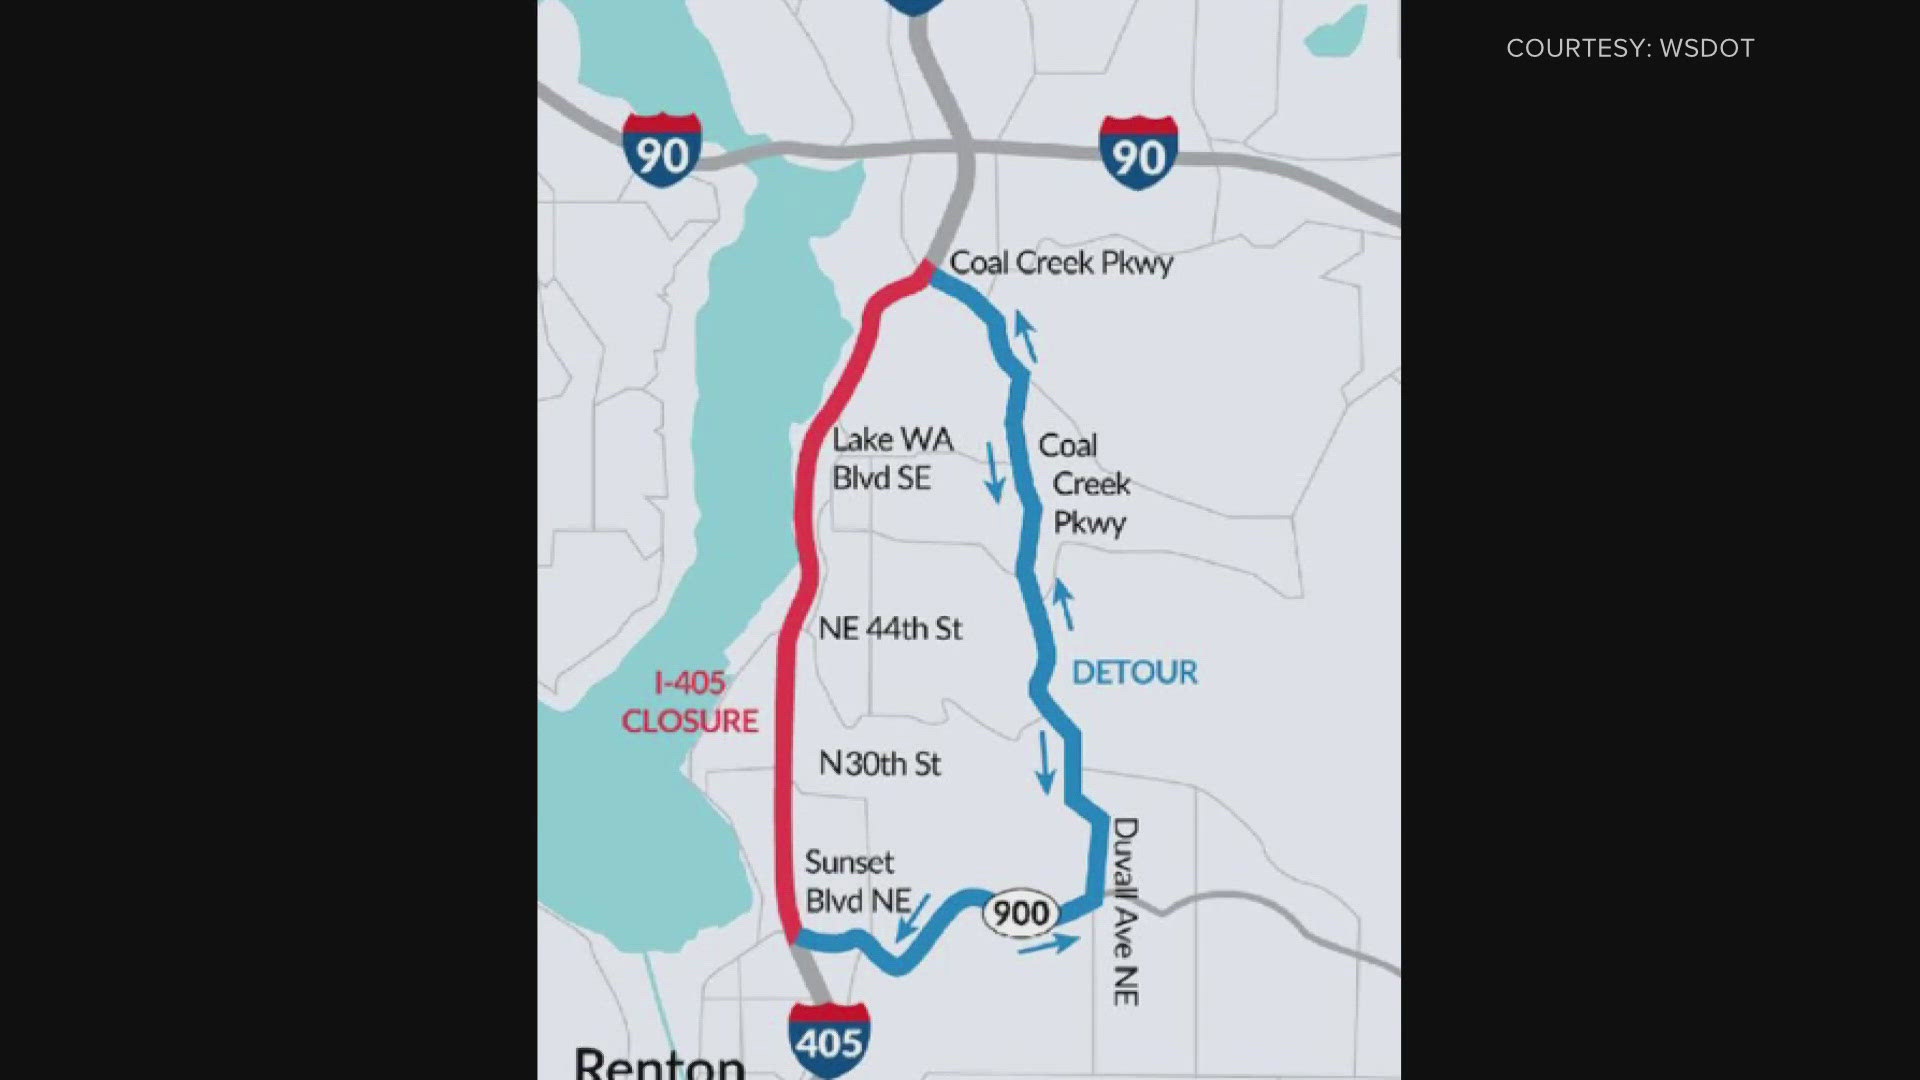 All lanes of I-405 will be closed in Renton this weekend for road work.